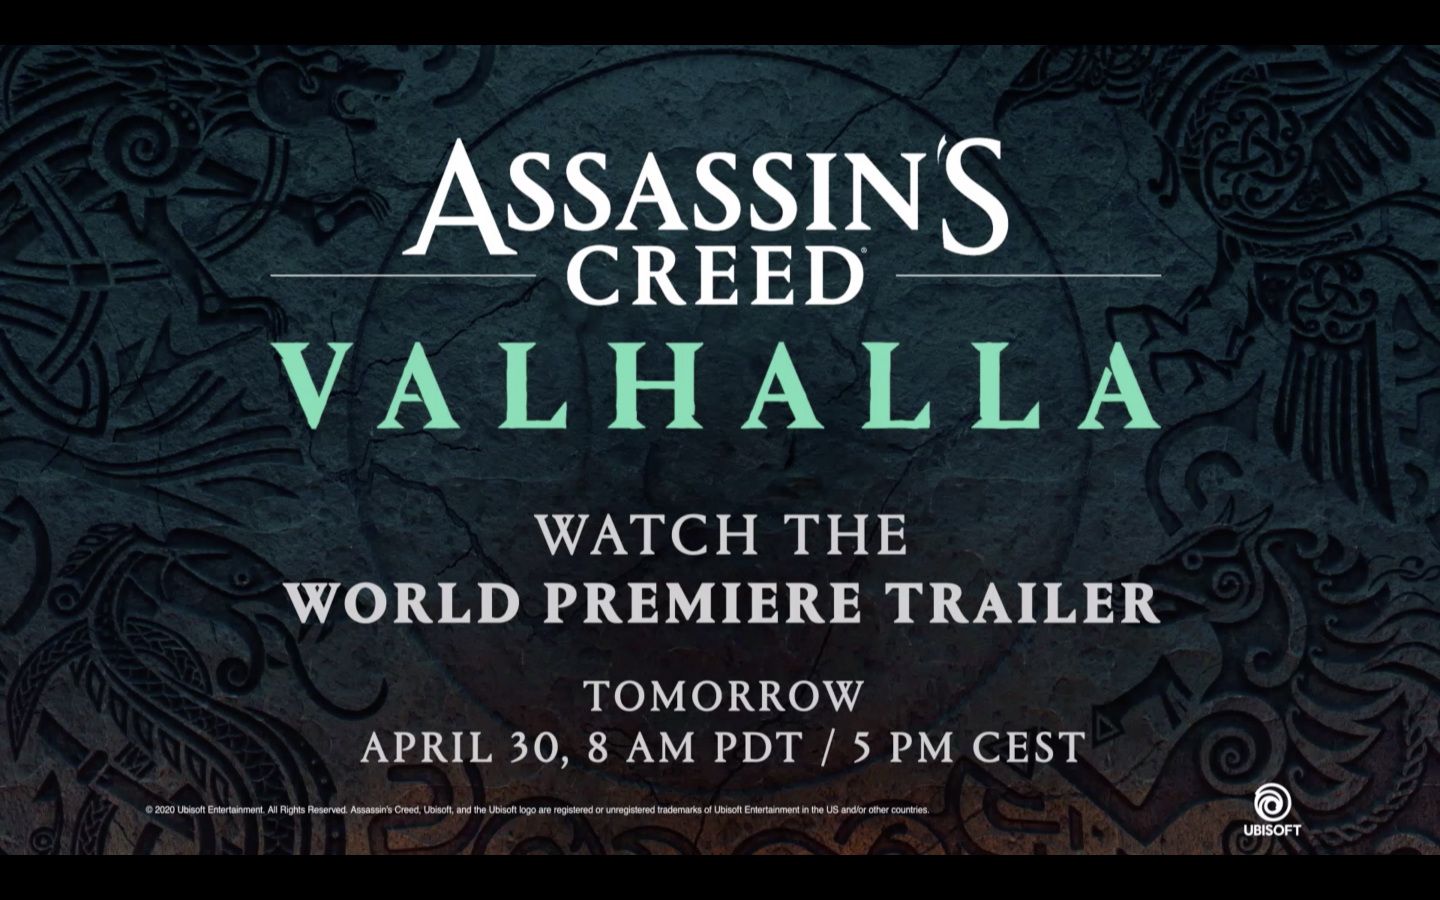 Assassins Creed: Valhalla is the next game in the AC universe